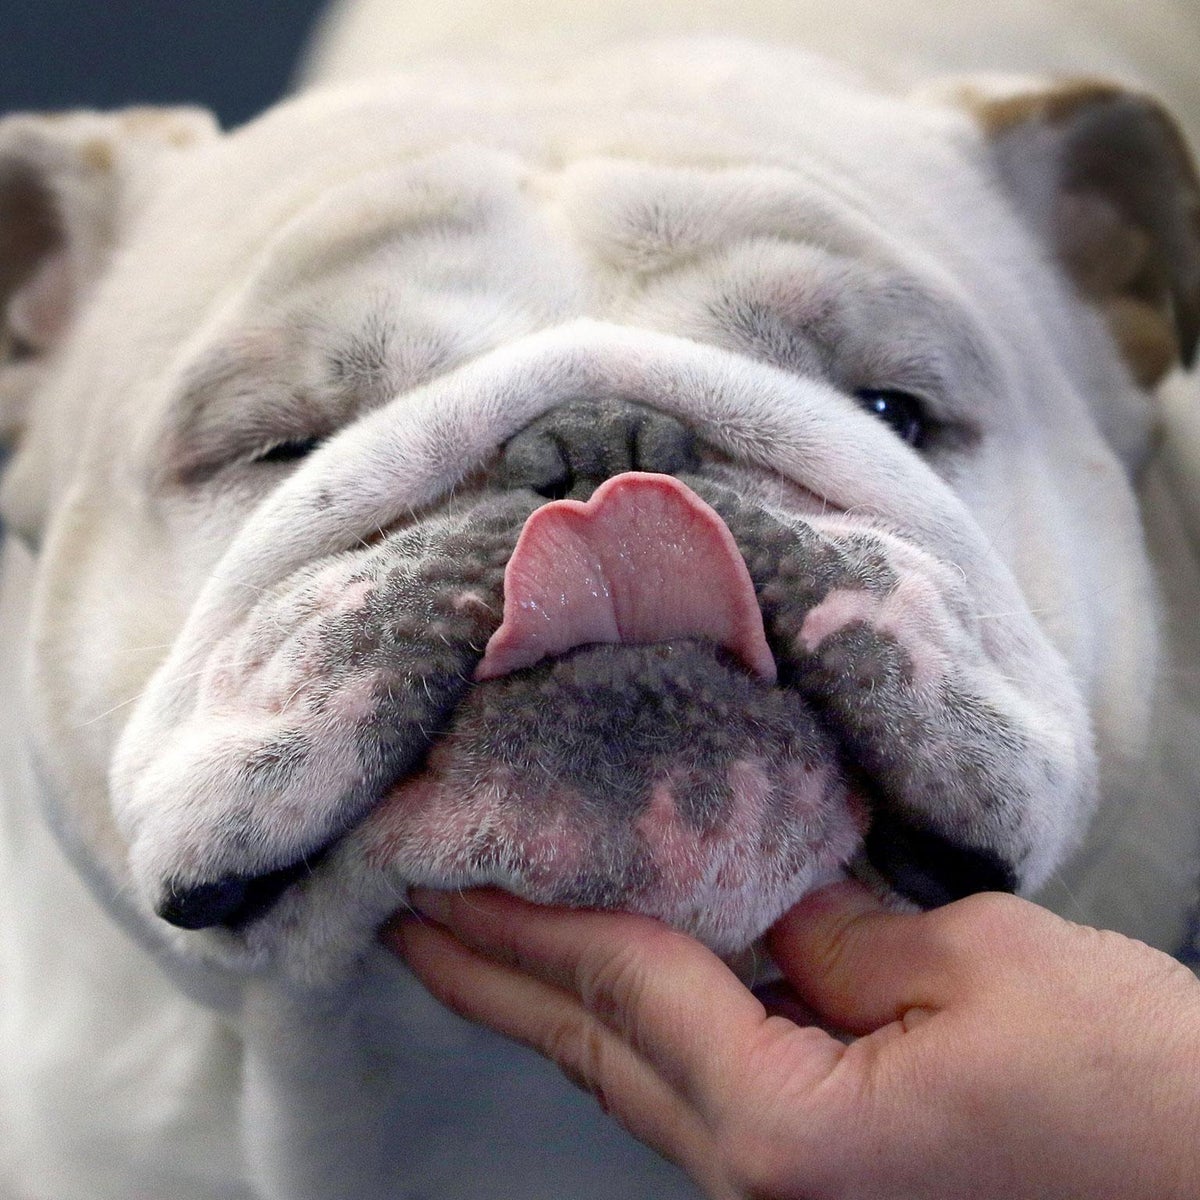 English bulldogs now so inbred their appalling health problems will not  improve, The Independent